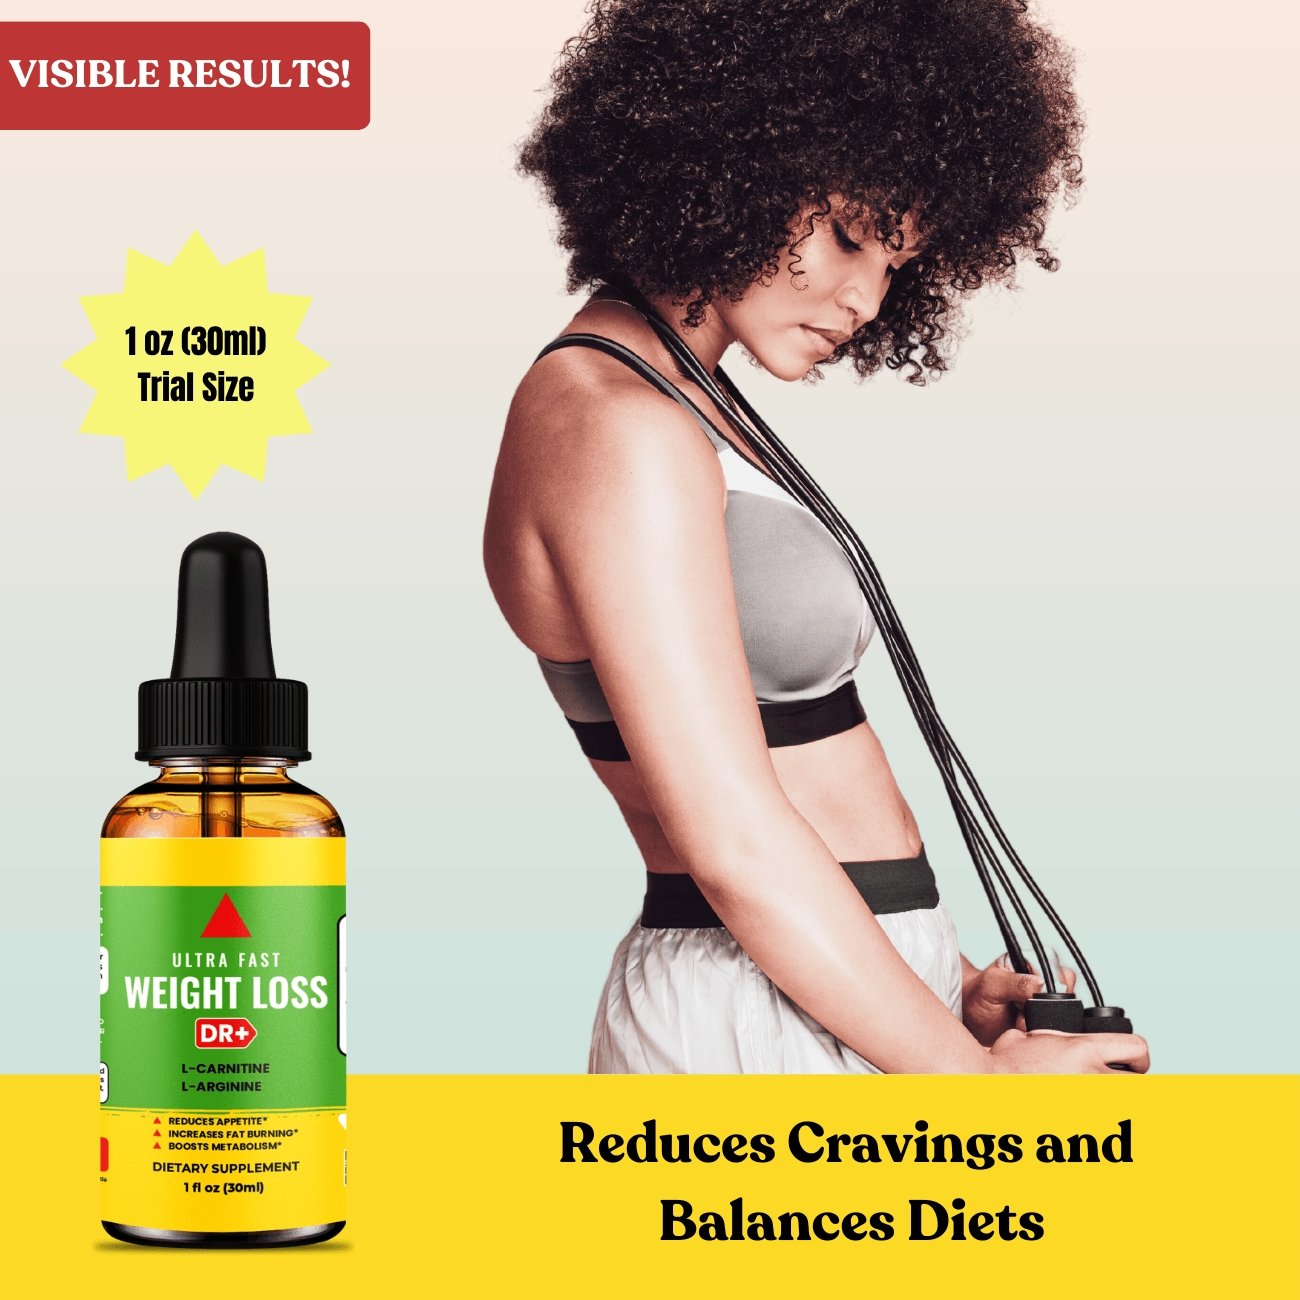 Diet Drops - Suppress Appetite, Burn Fat, Boost Energy - Fast Results | 3-Pack - Herblif Nutrition USA